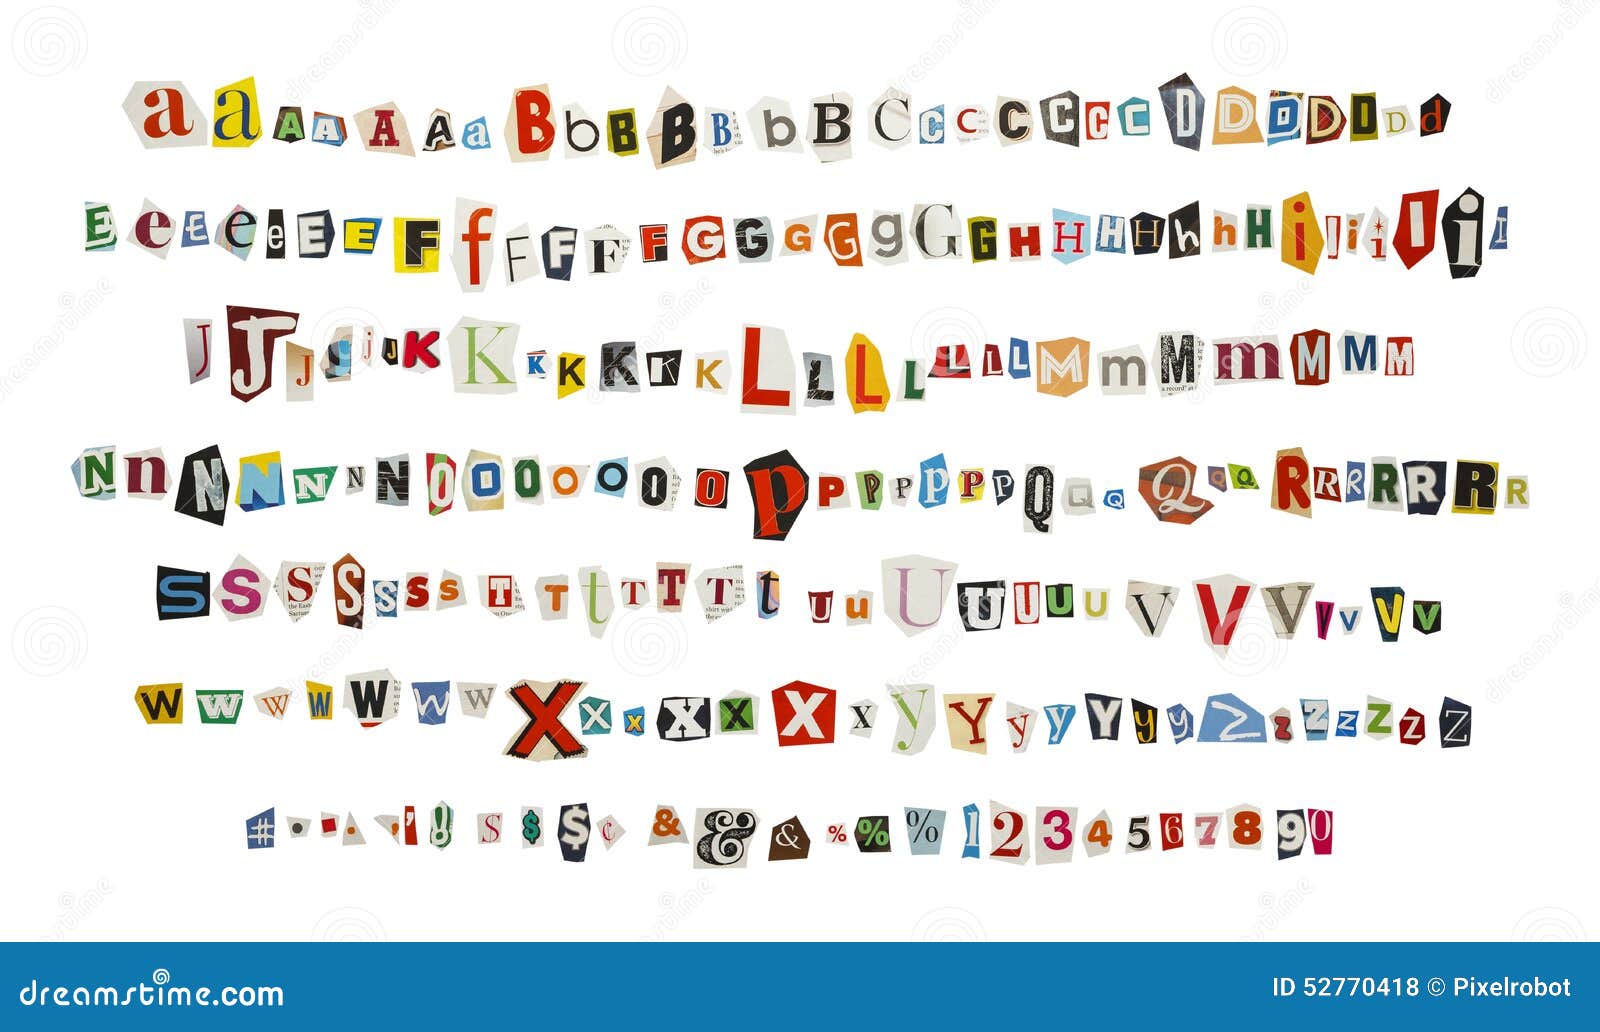 Sticker Vector Ransom Note- Cut Paper Letters, Numbers, Symbols